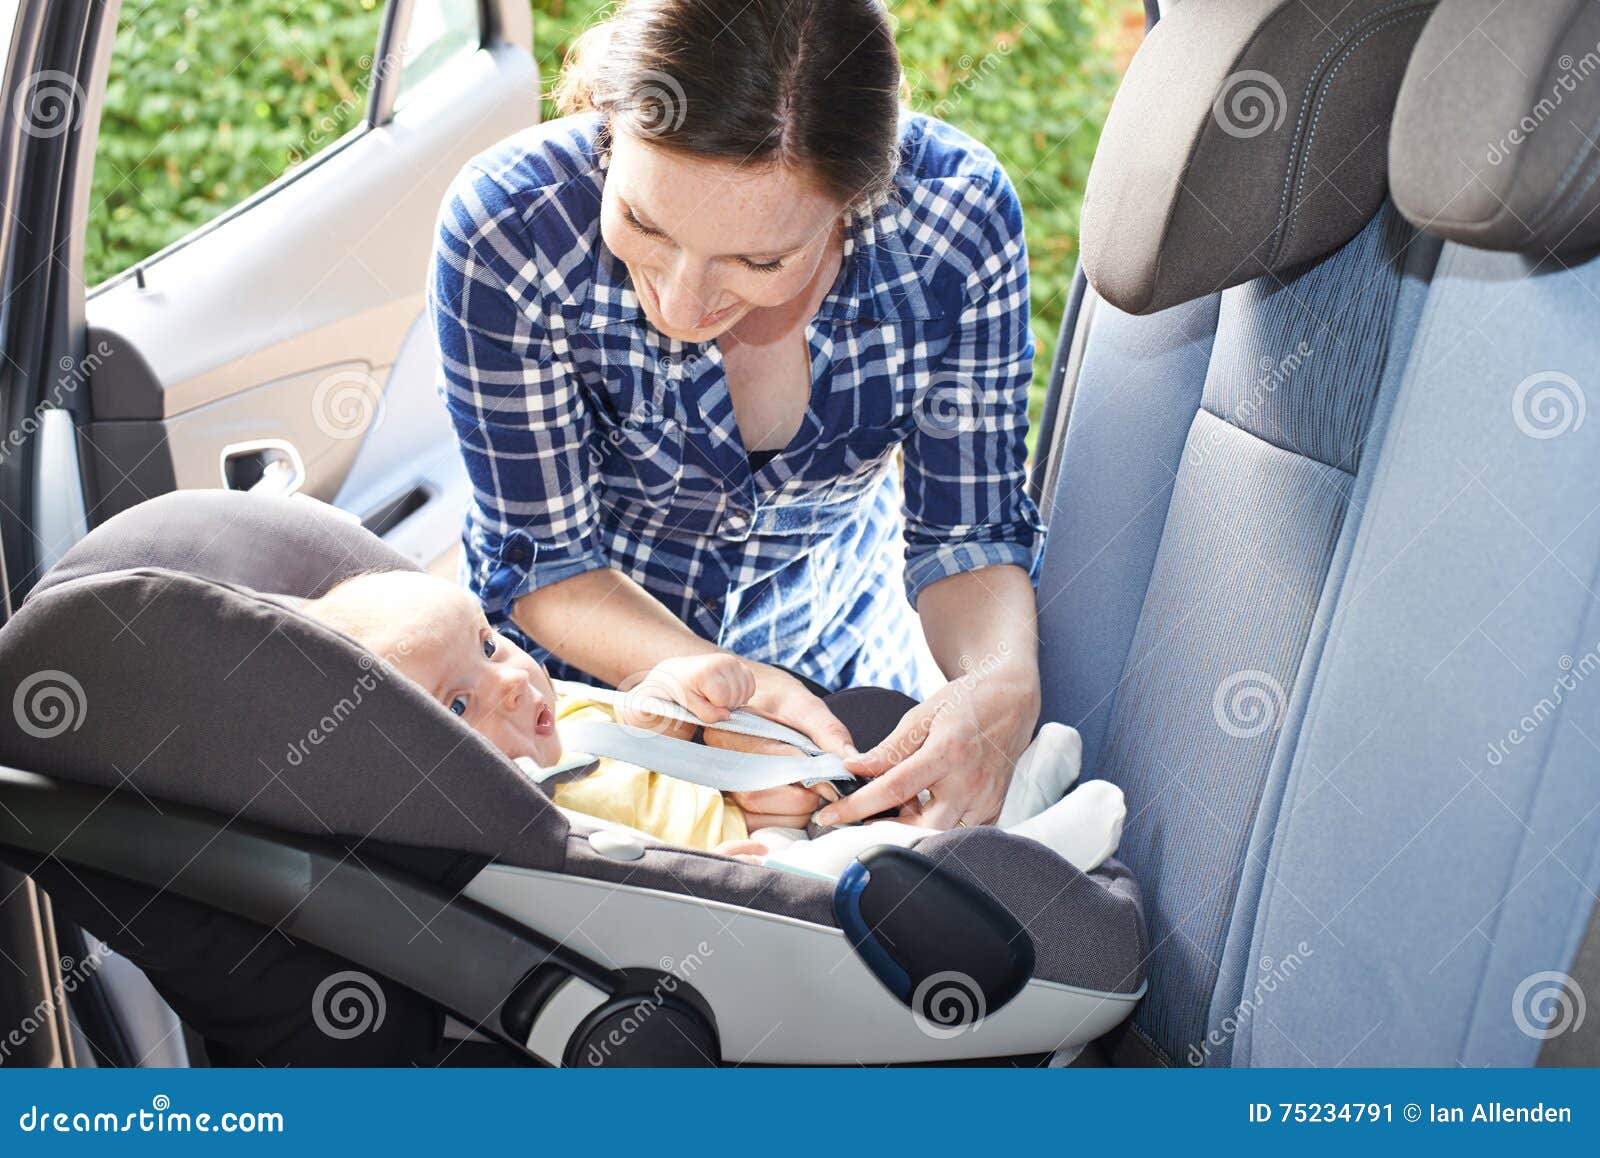 mother putting baby into car seat for journey